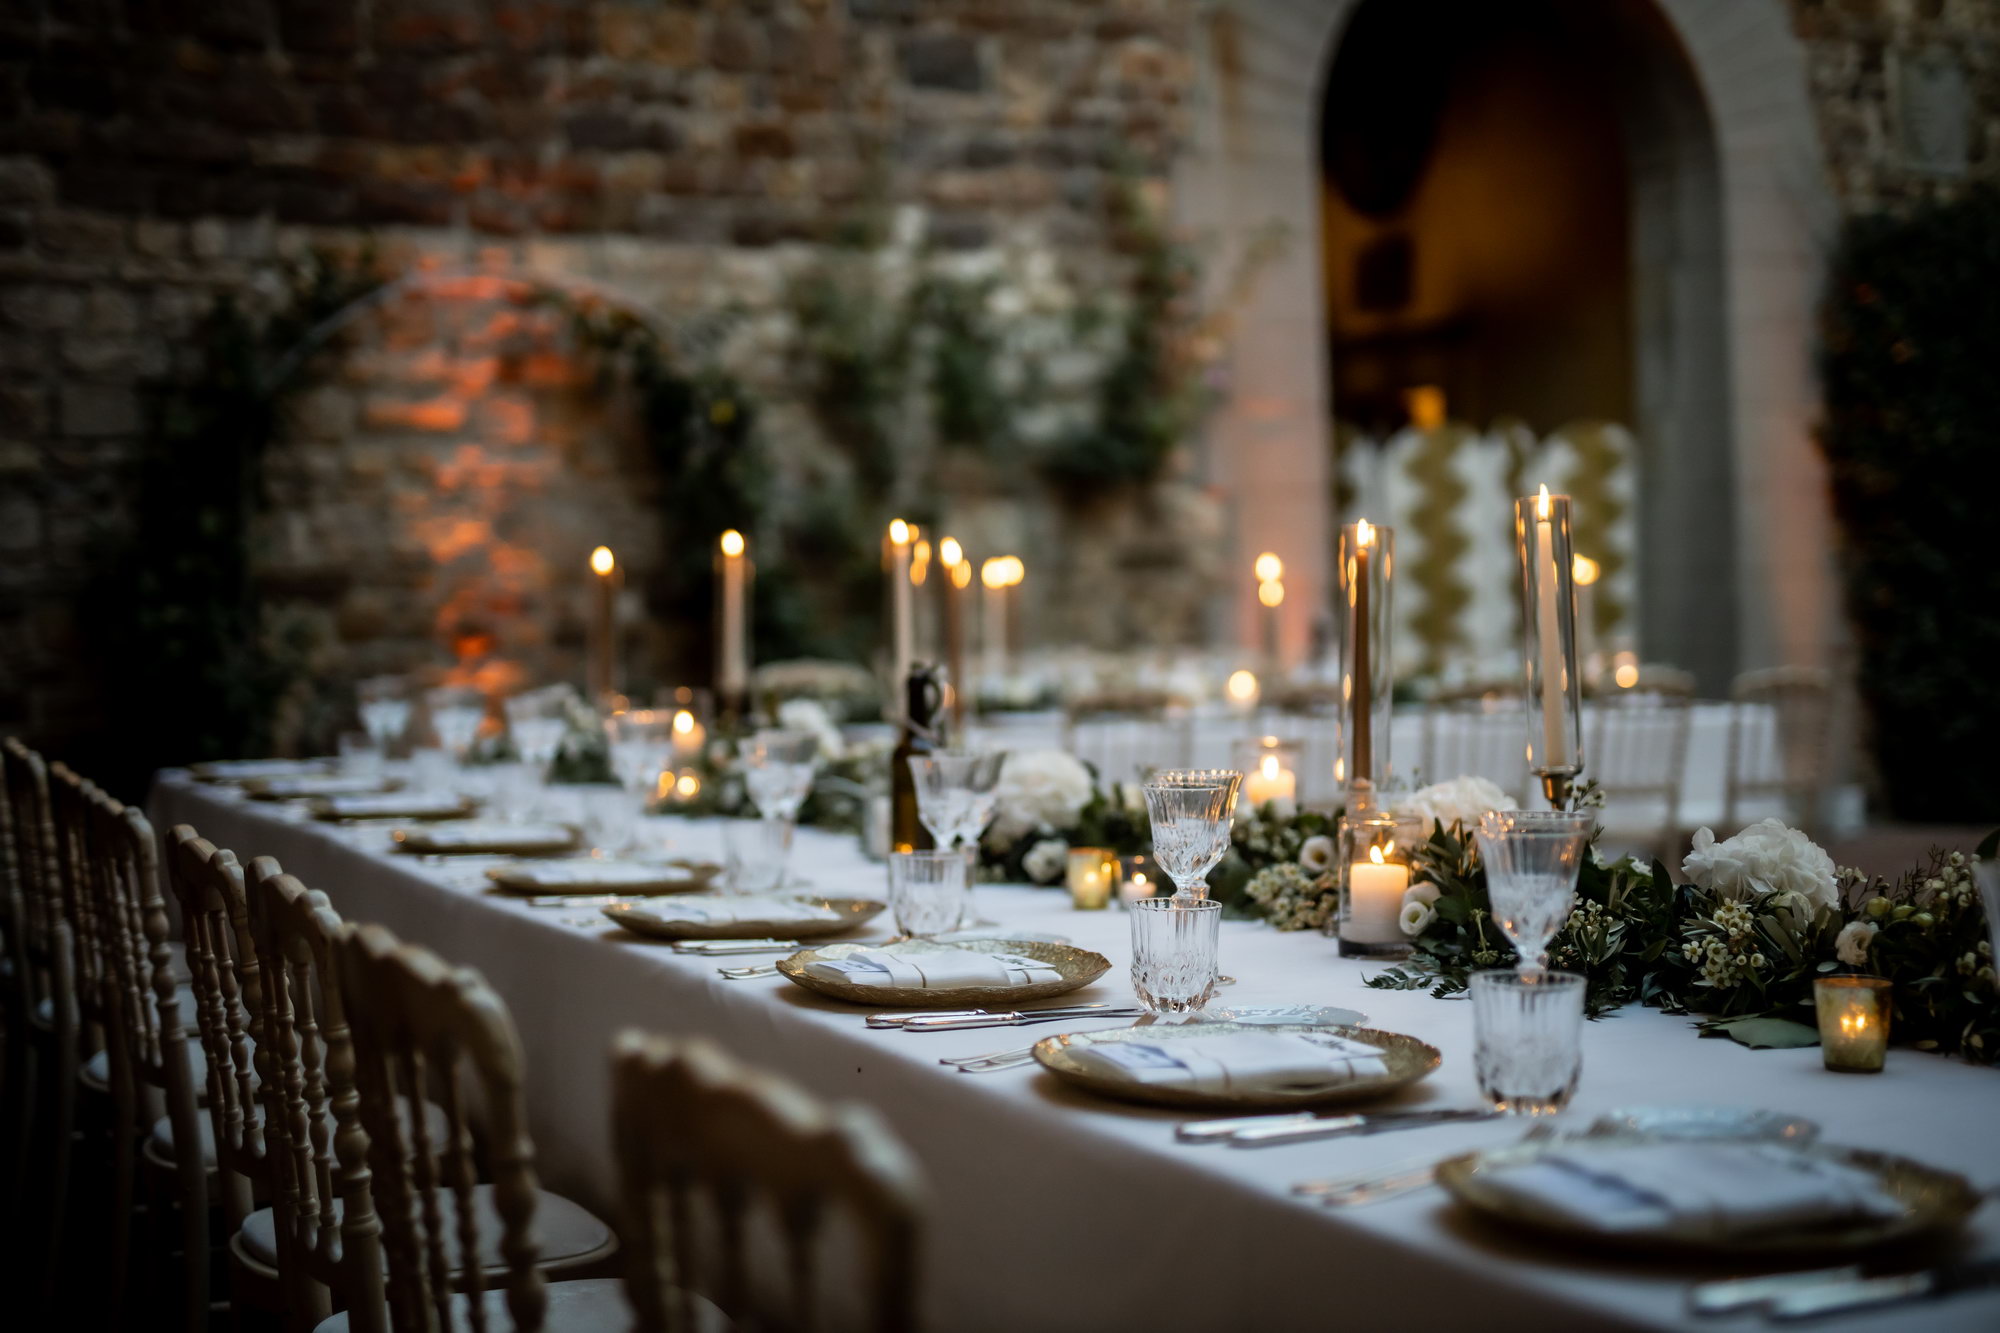 ..imagesweddings enthe dream of getting married in Italy wedding photographers photo27_028 by Photo27